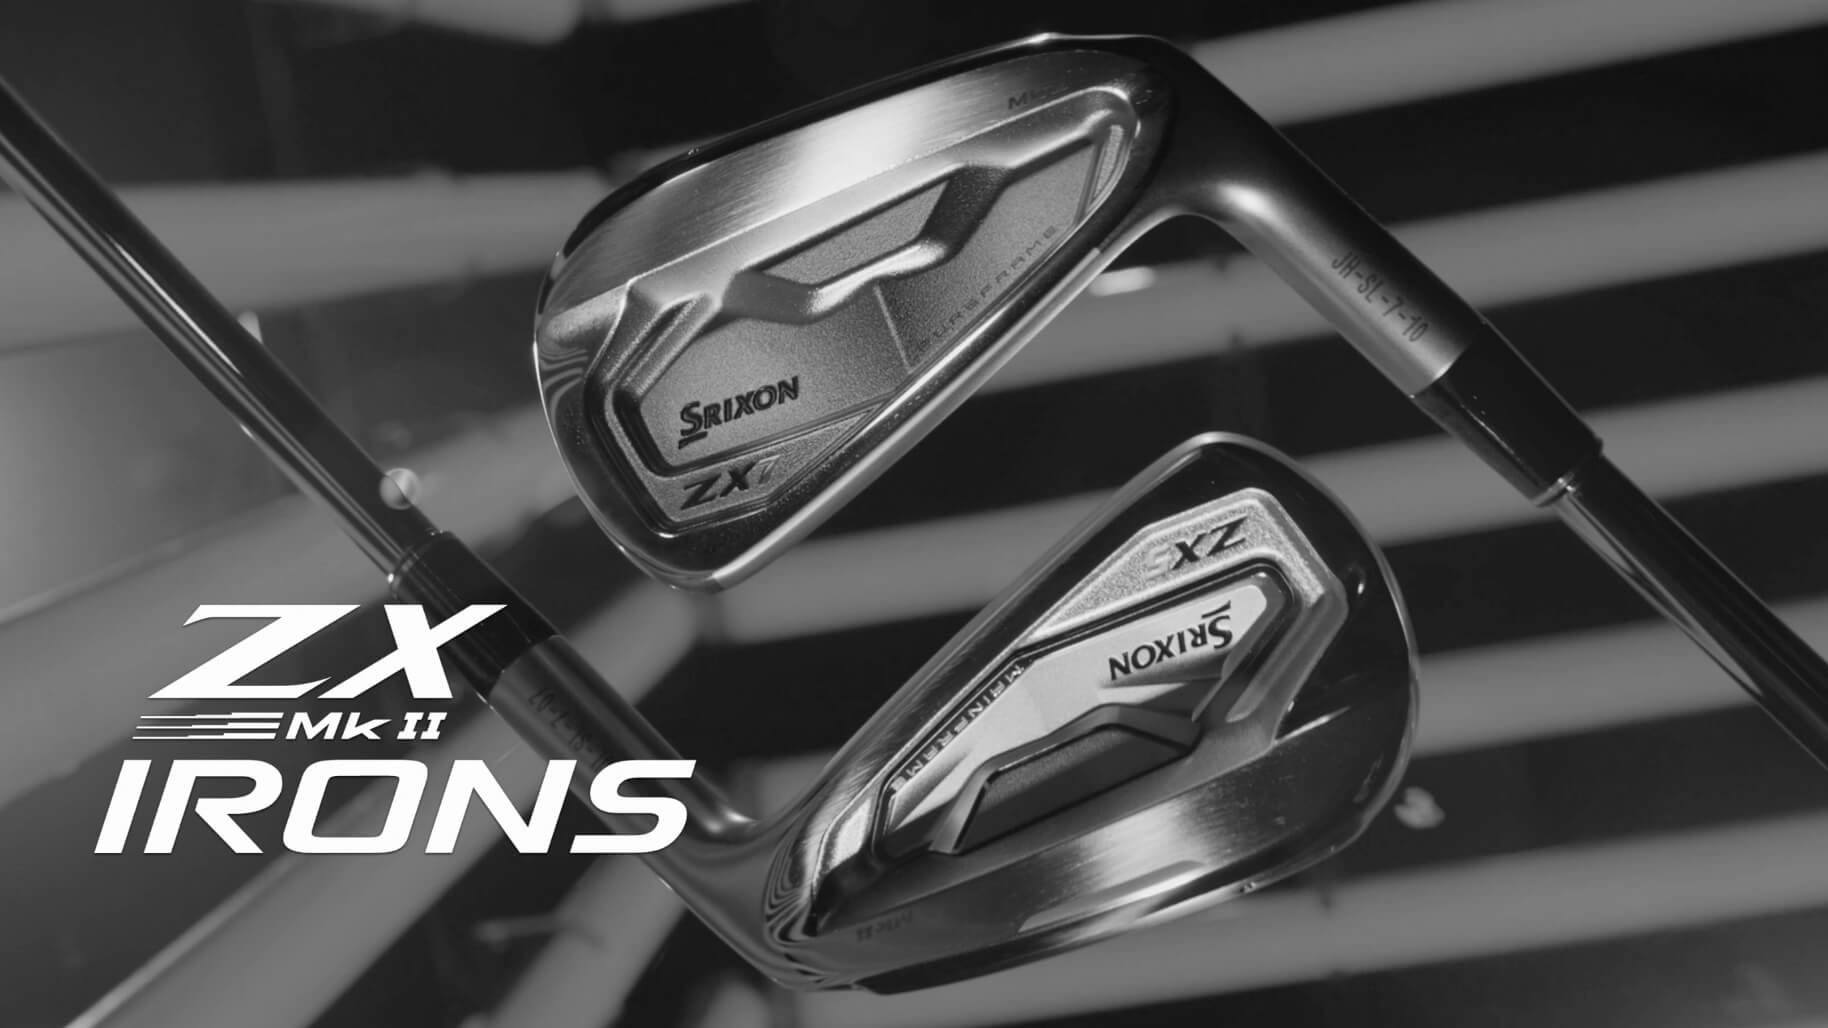 ZX Mk II Irons | A Powerful System